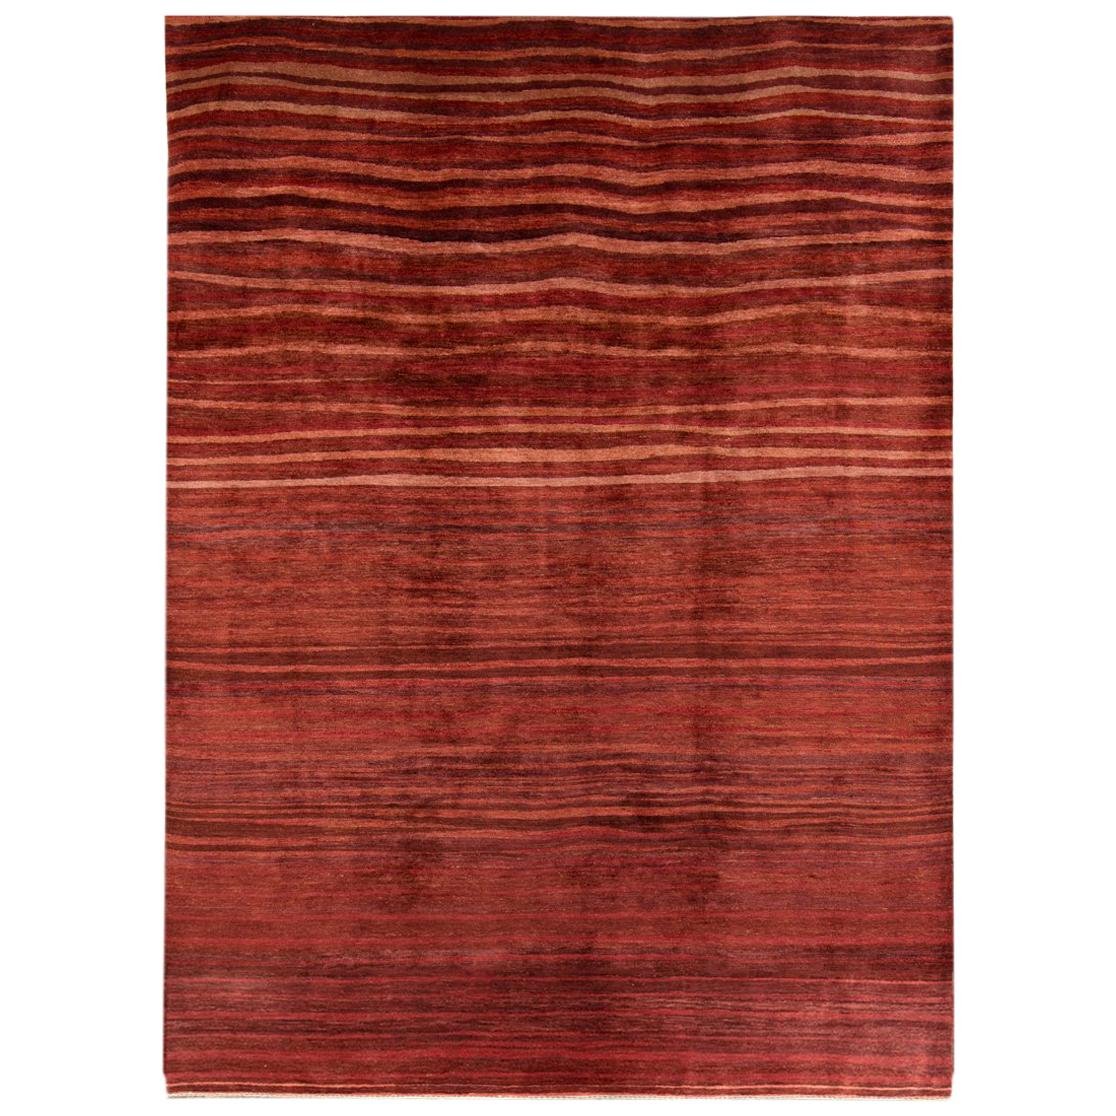 Large Deep Red Contemporary Gabbeh Persian Wool Rug 